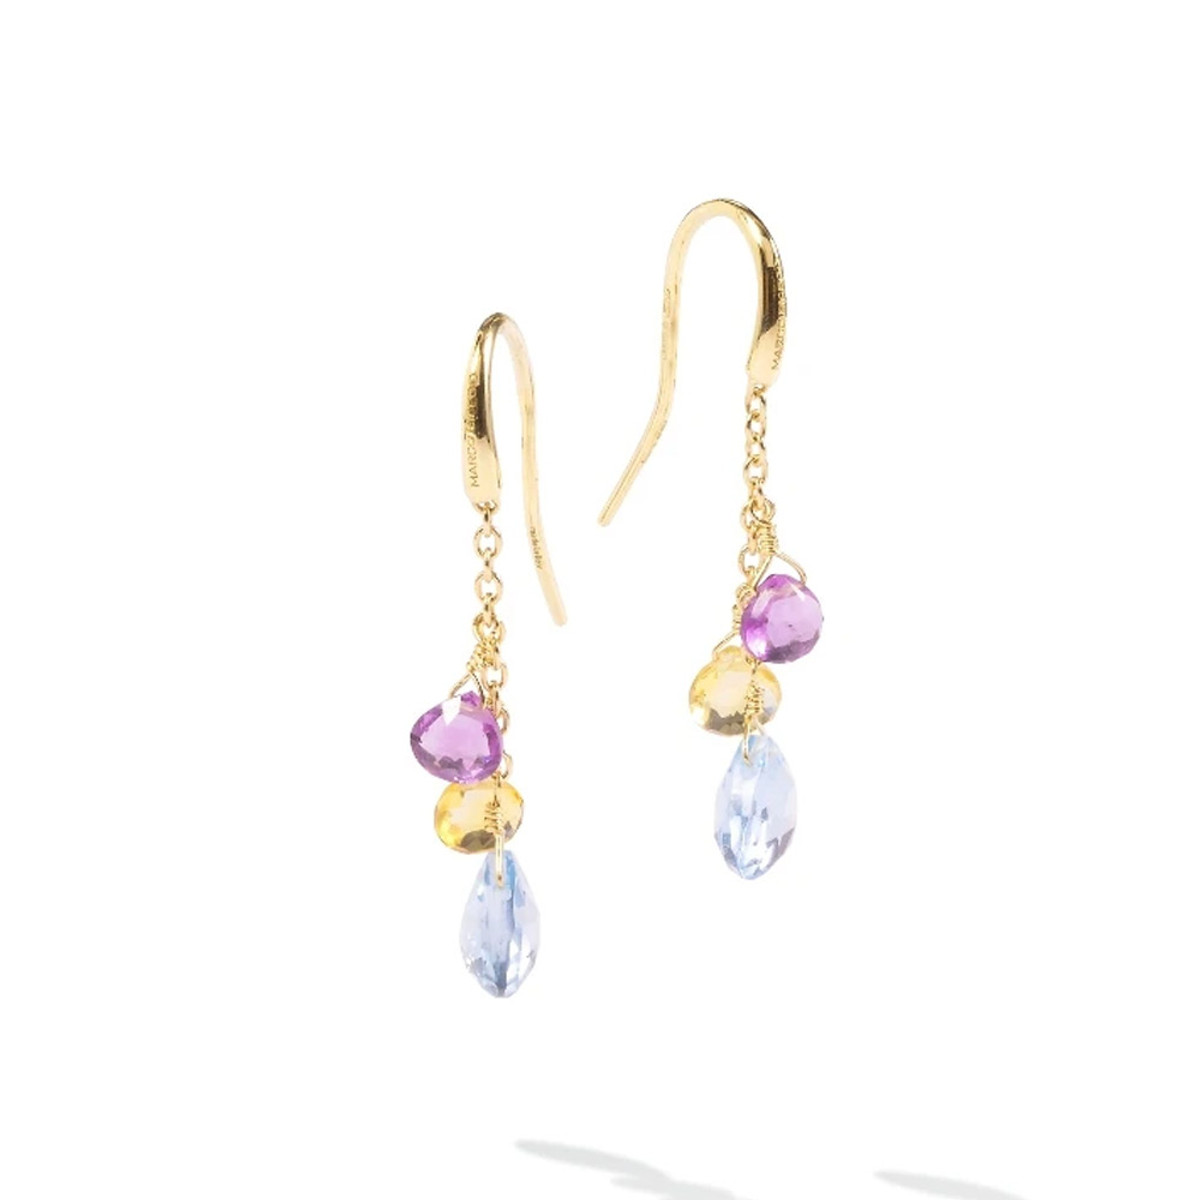 Marco Bicego 18K Yellow Gold Paradise Mixed Topaz Small Drop Earrings-30042 Product Image